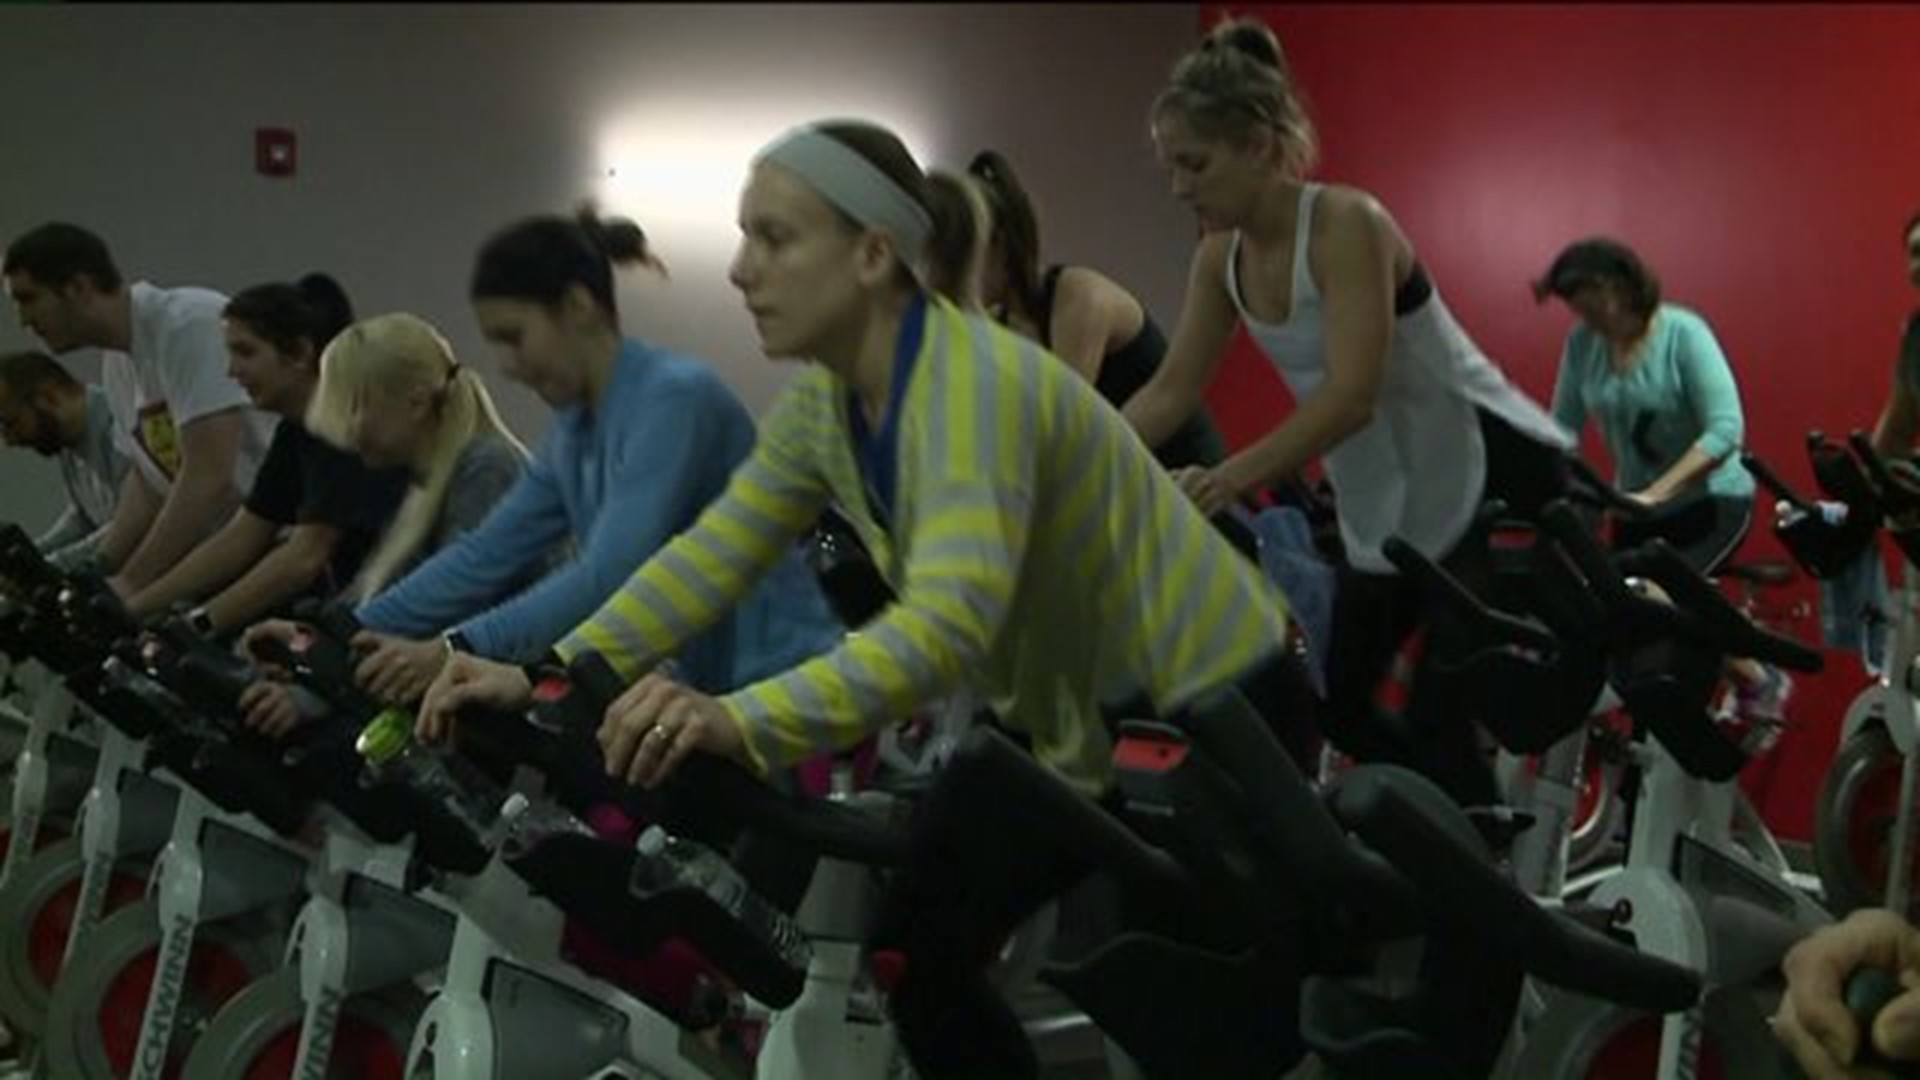 Spin Class Raises Money to Get Kids Playing Outdoors